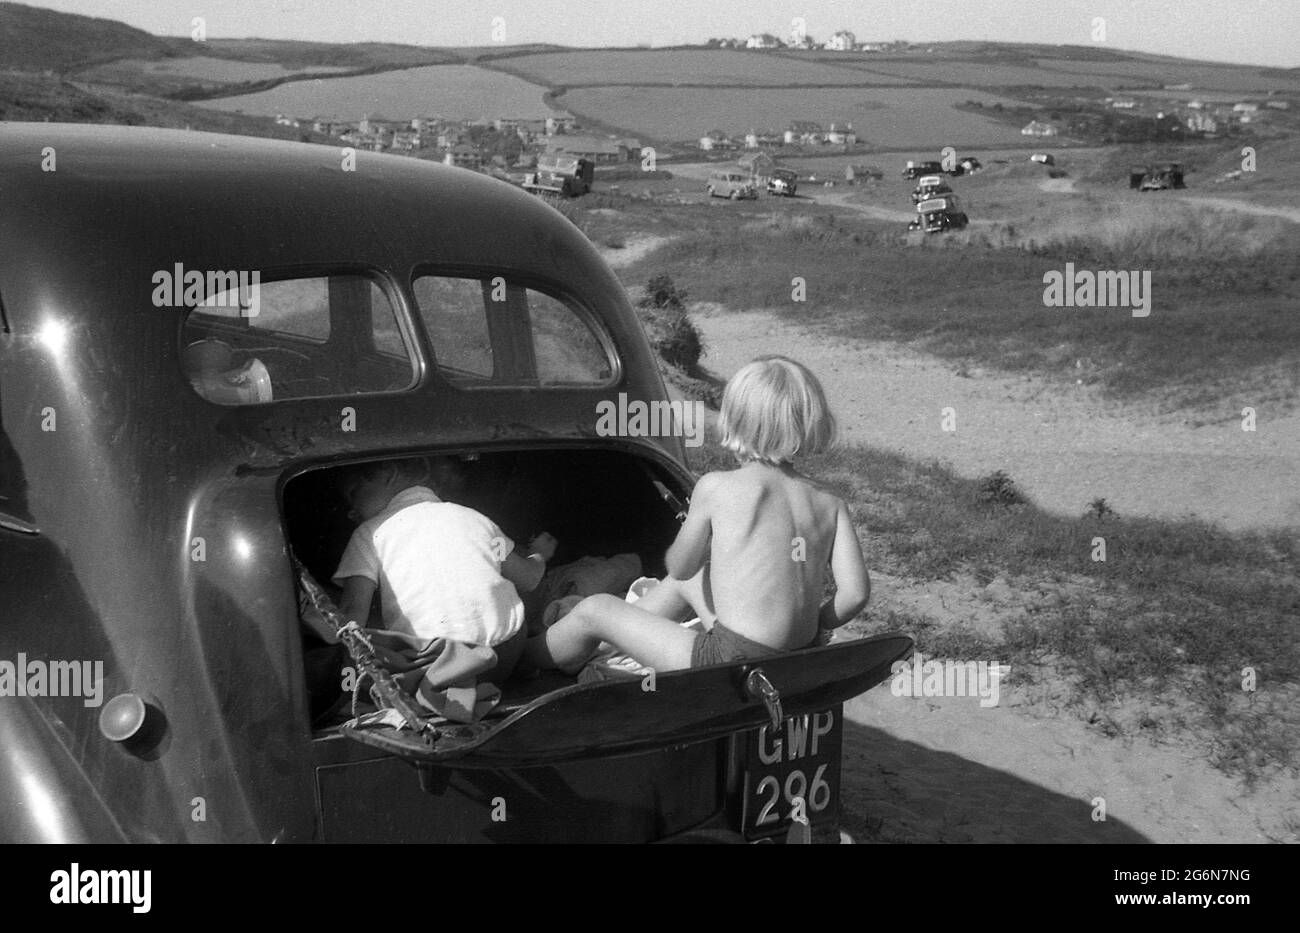 1950s, historical, two little boys in the boot or trunk of a car of the era, parked on some sand dunes, one of the boy's in the storage area, the other outside sitting on the fold down boot lid or tailgate, England, UK. Stock Photo